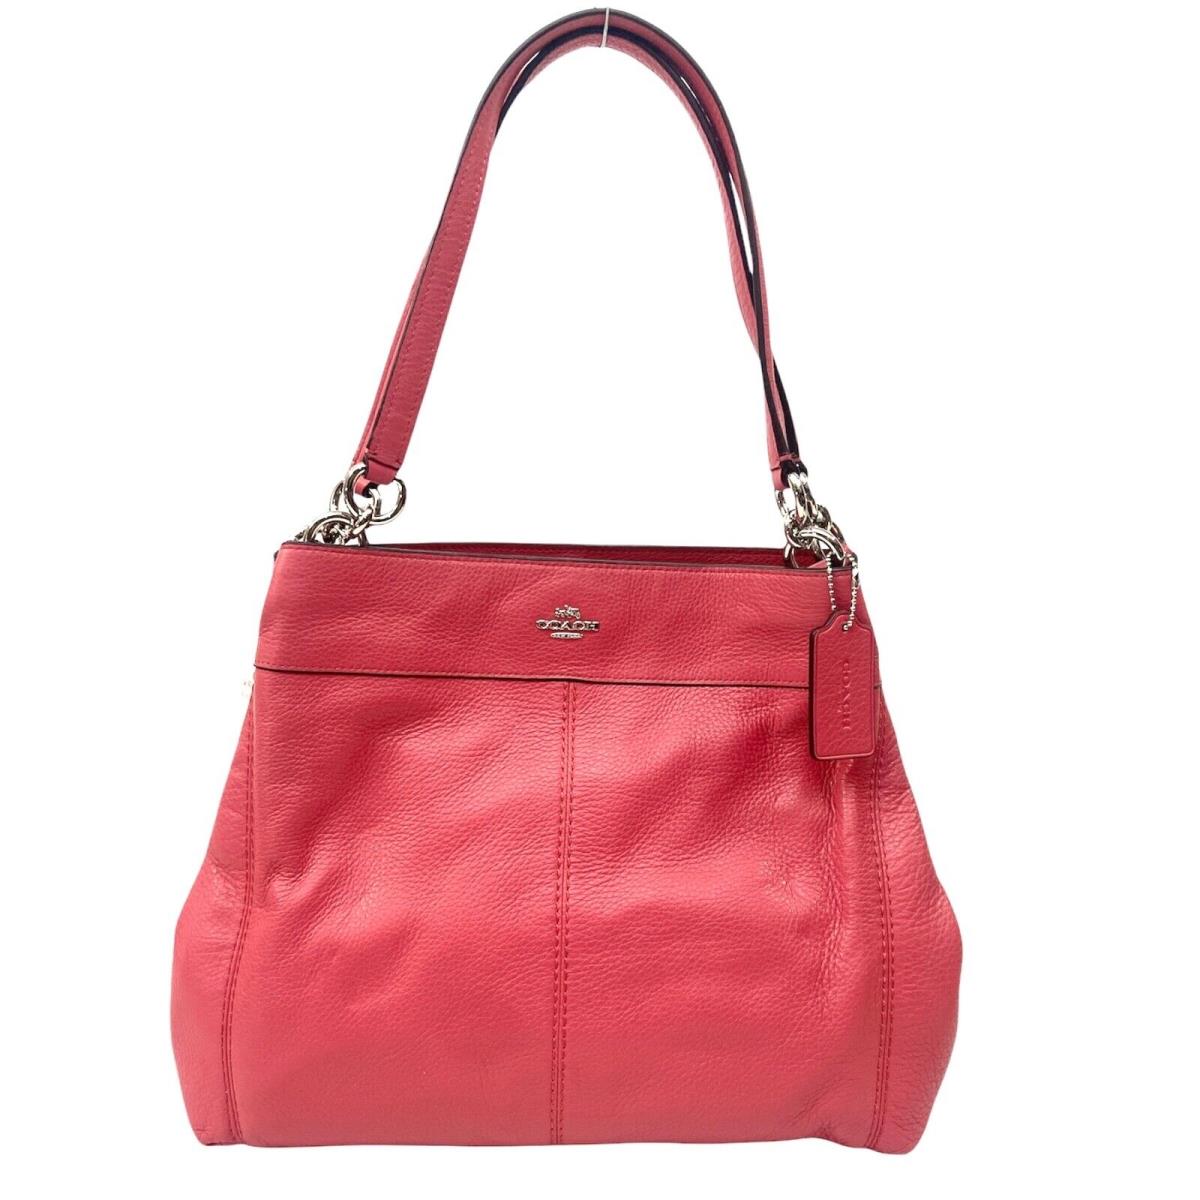 Coach Pebble Leather Lexy Shoulder Bag Strawberry Strawberry